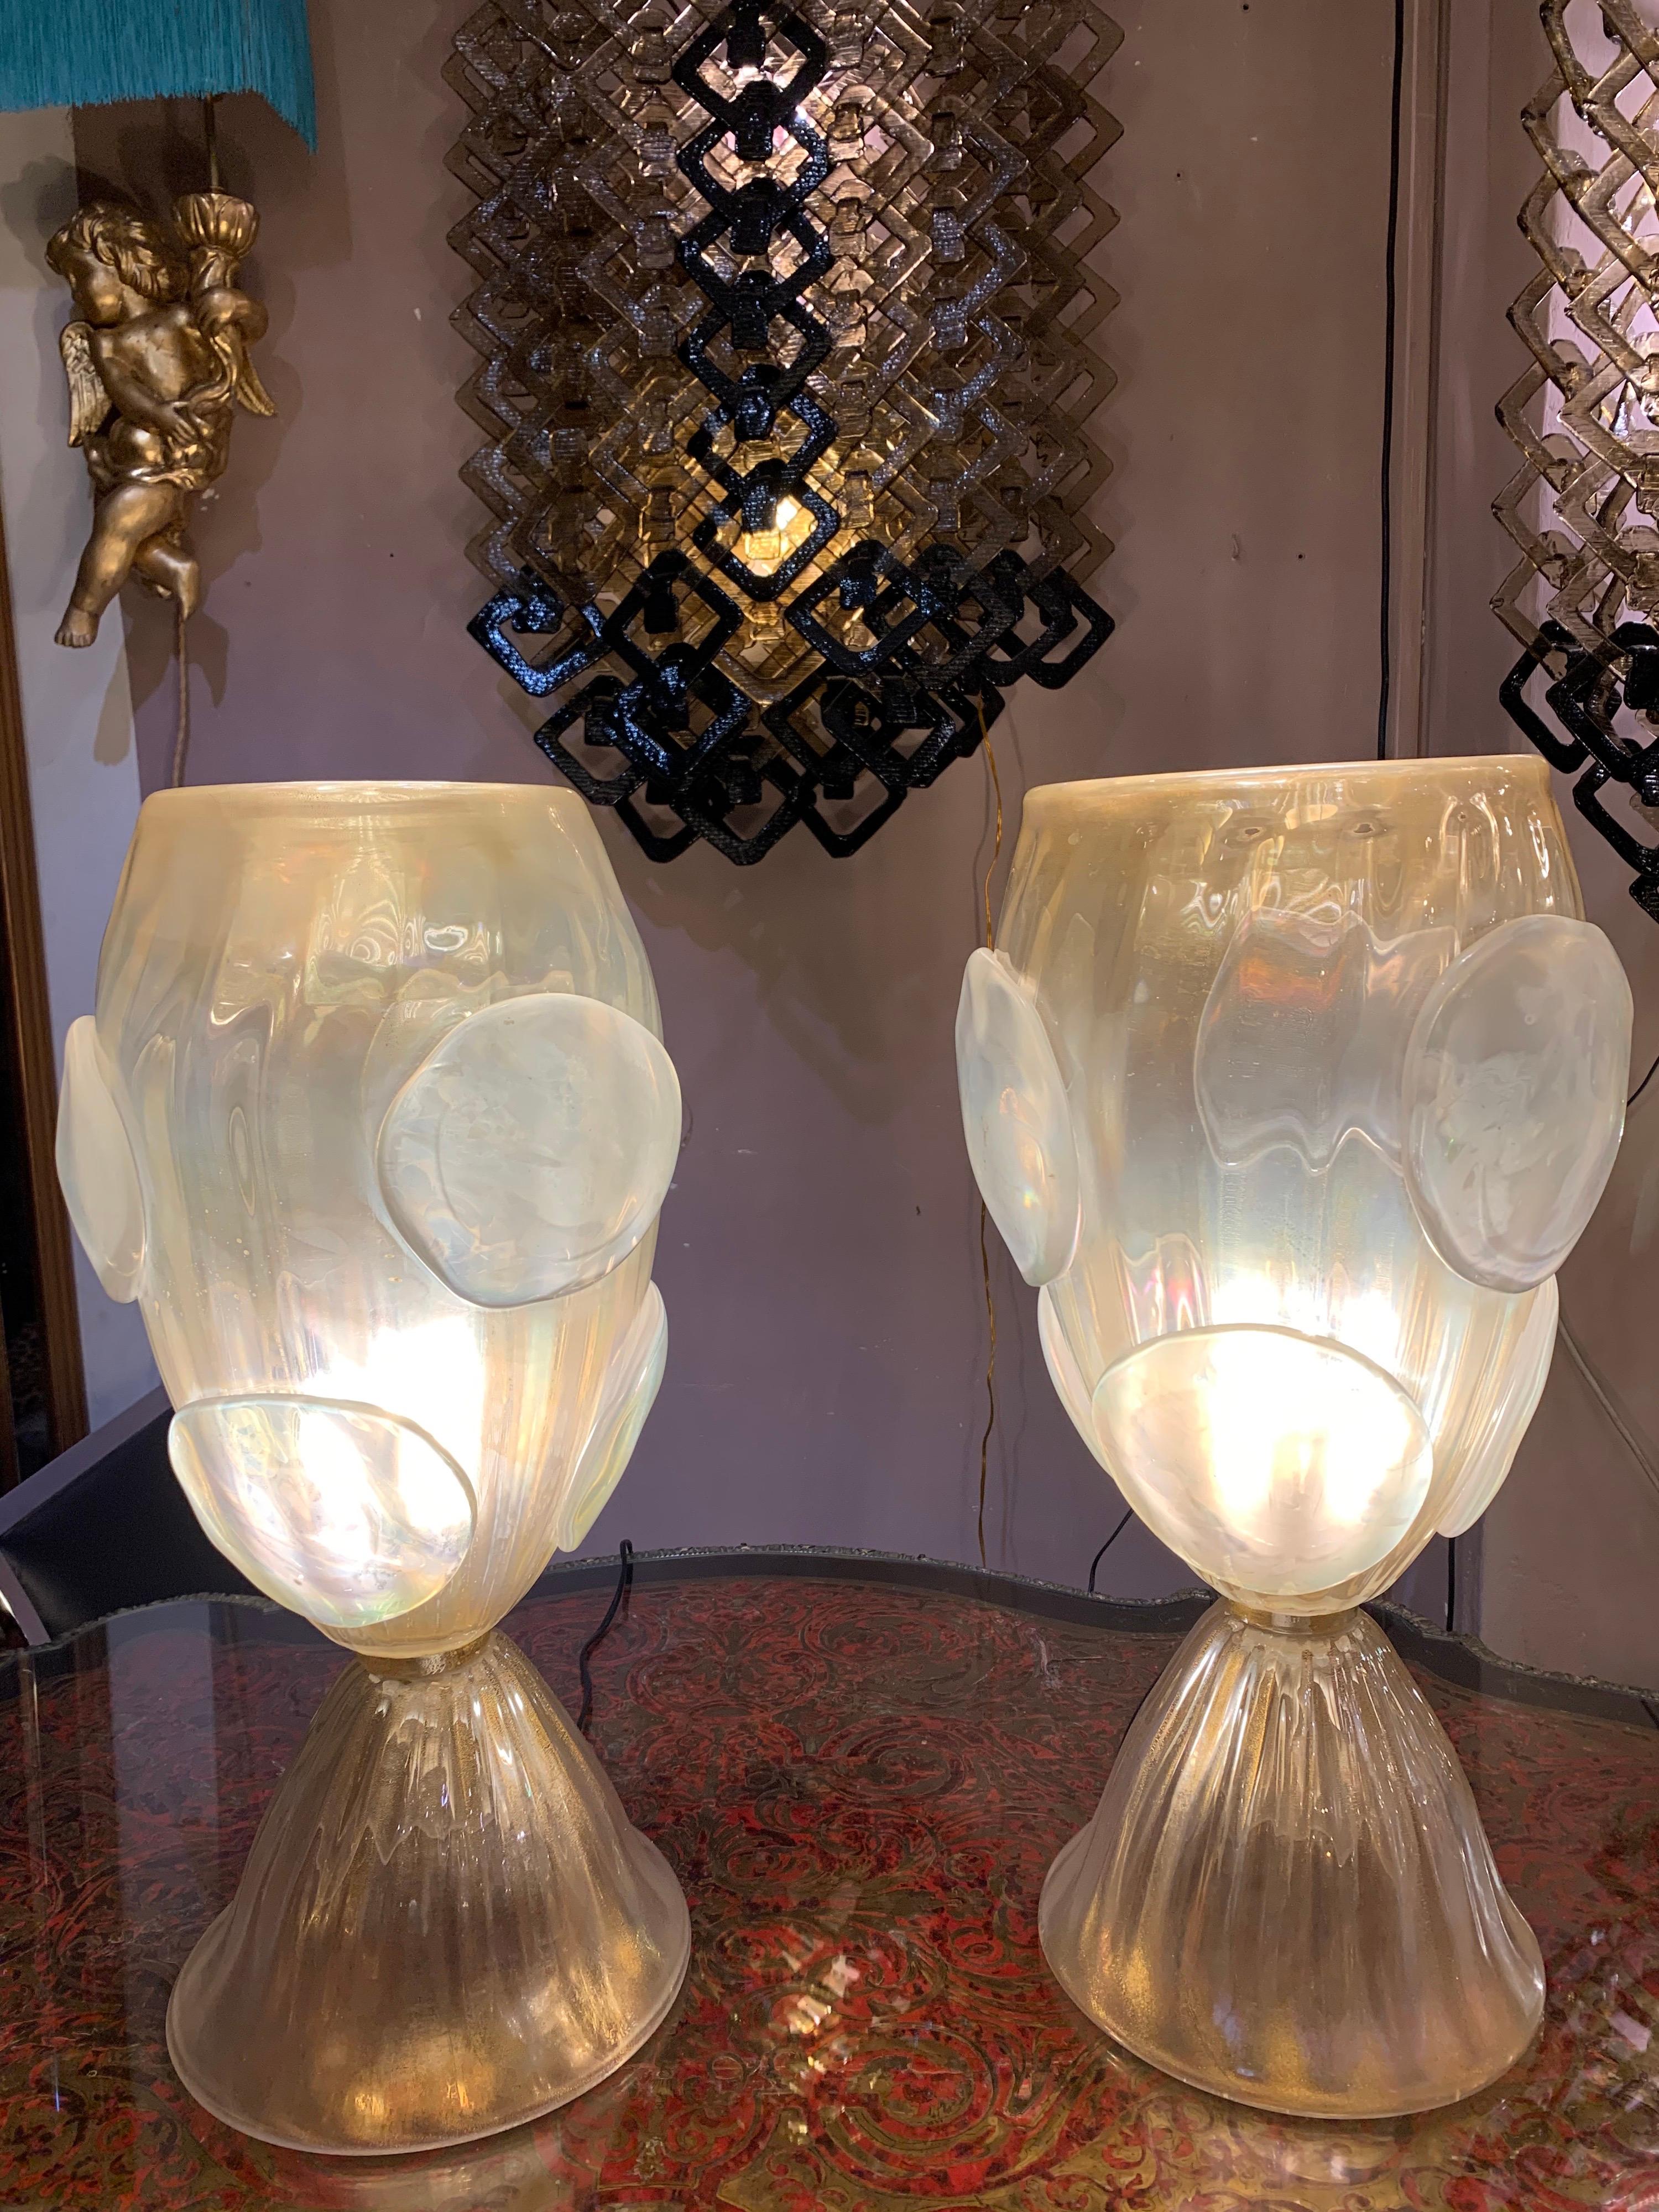 Pair of hand blown gold flecks Murano glass table lamps with iridescent effect.
The Murano glass is infused with gold powder.
The cup of the lamp consists of hand blown Murano glass round applications
One bulb each lamp.